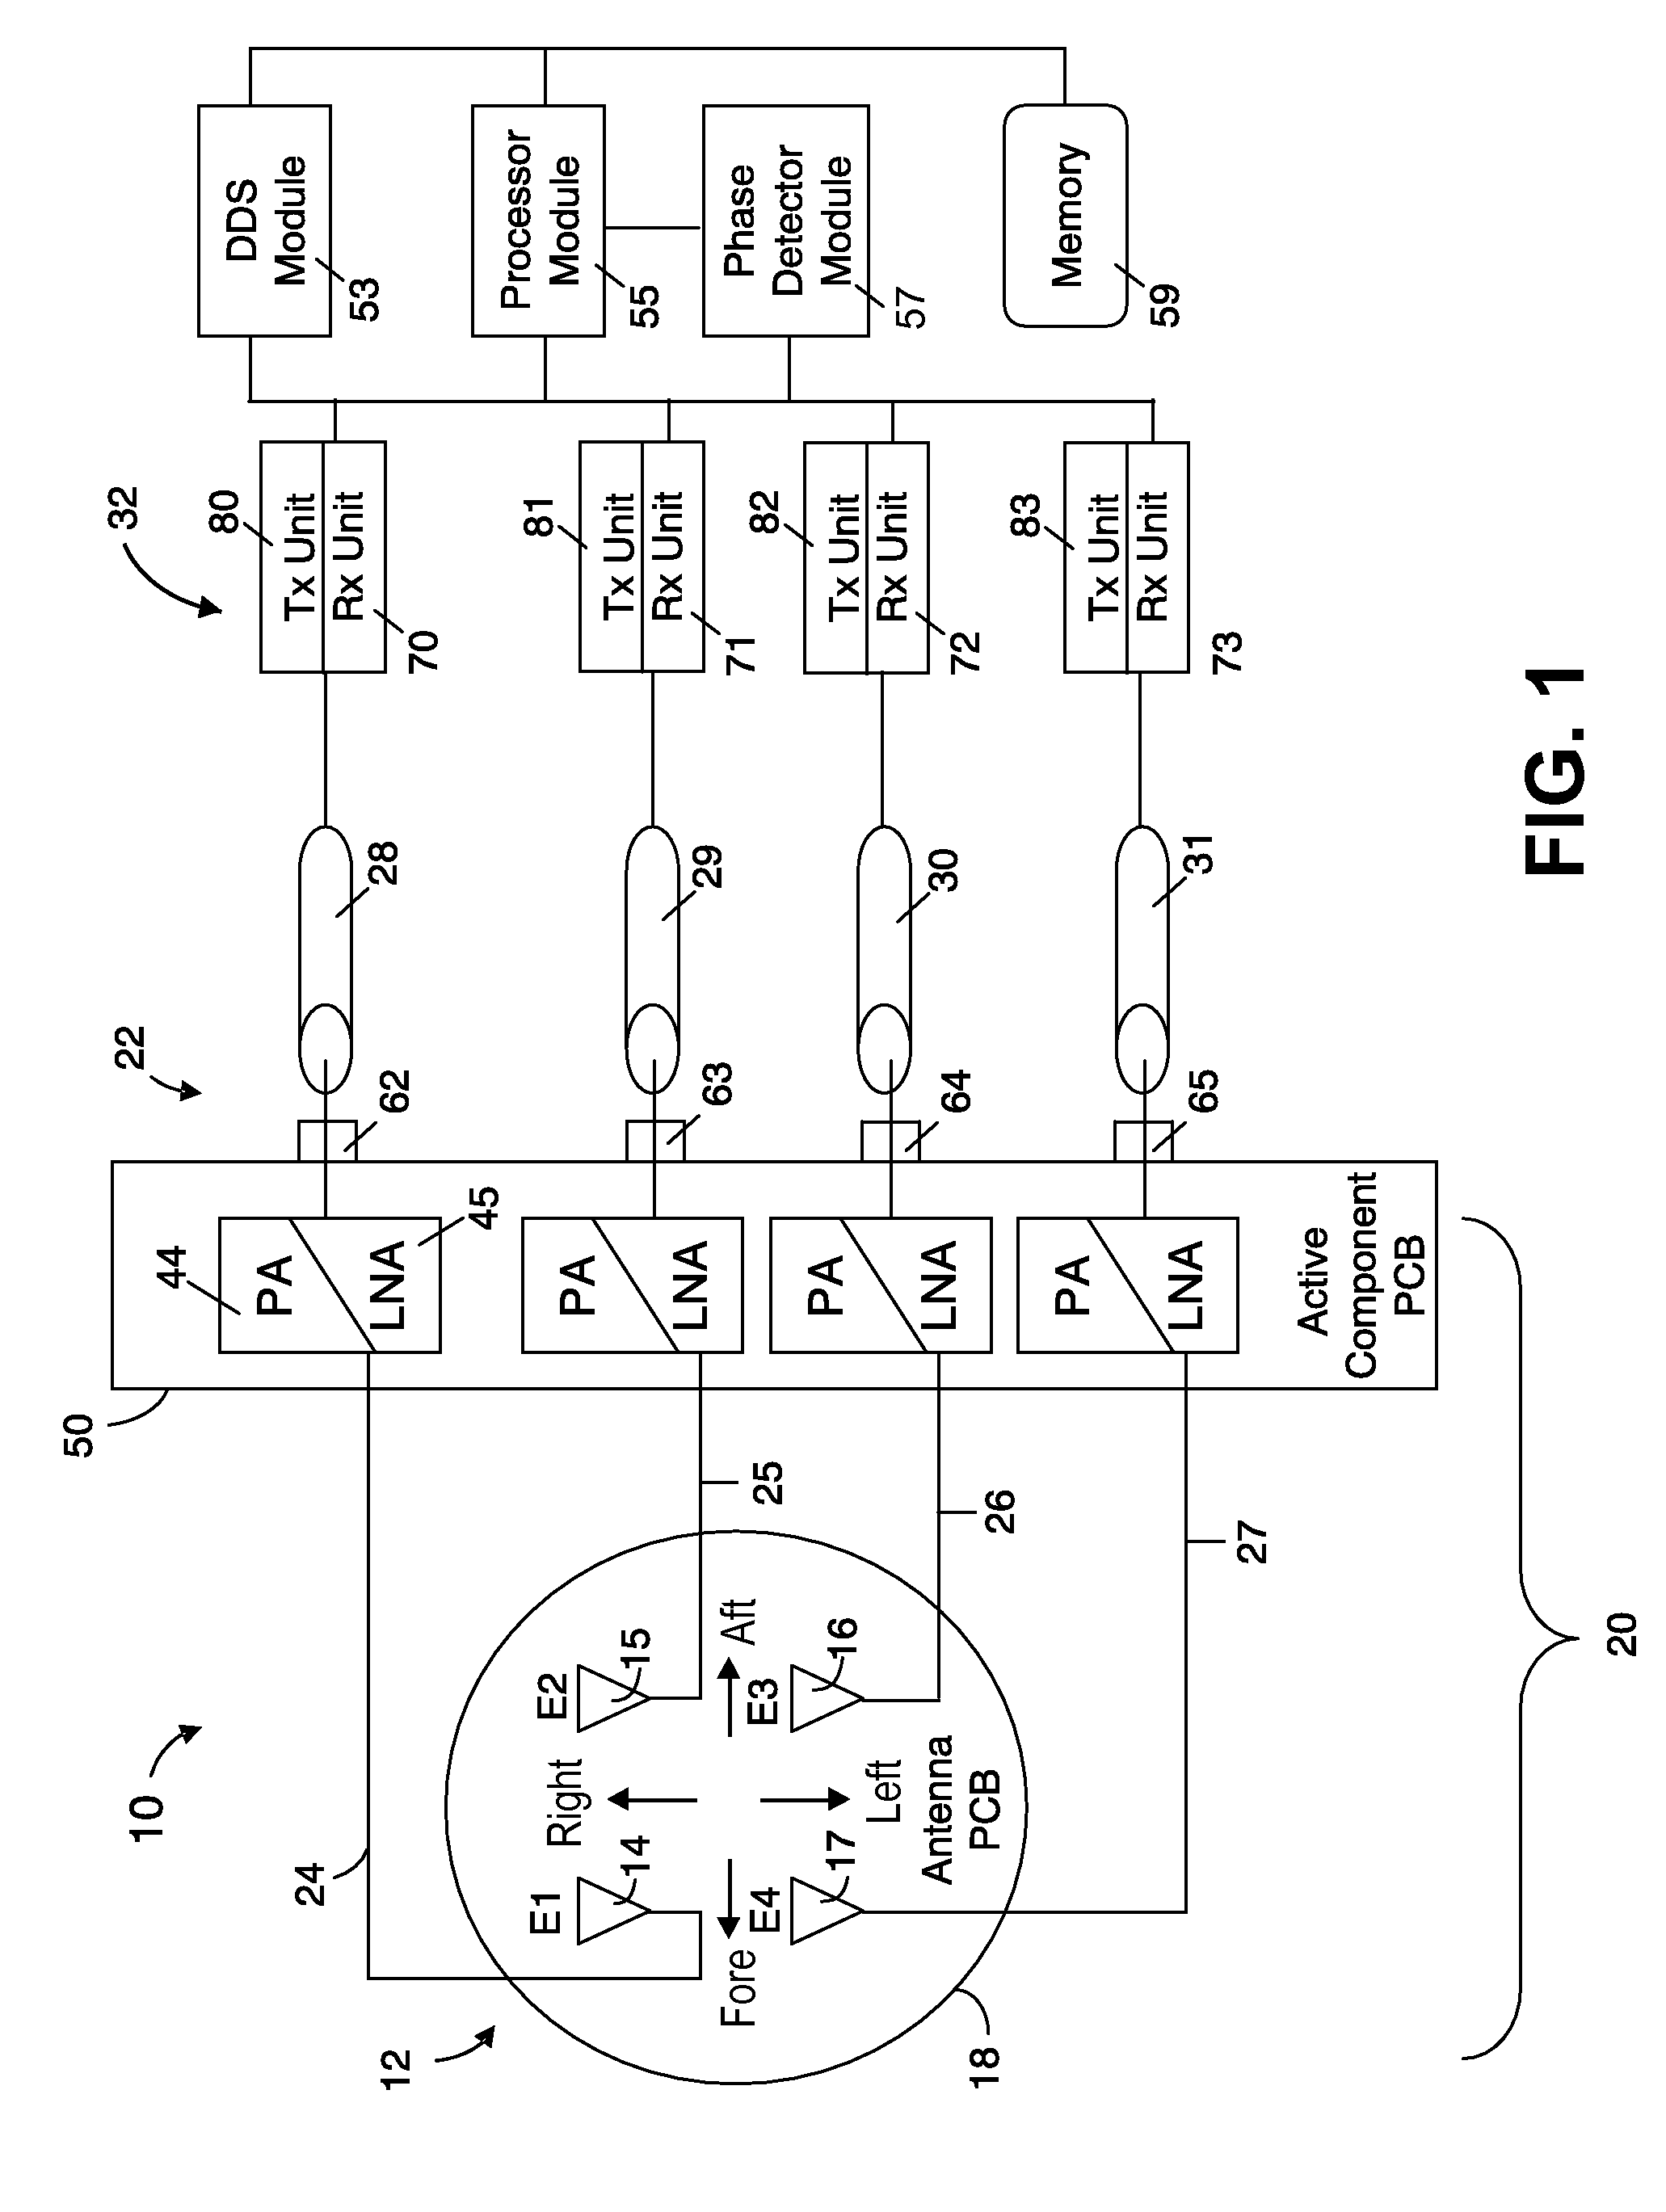 Methods and systems for frequency independent bearing detection